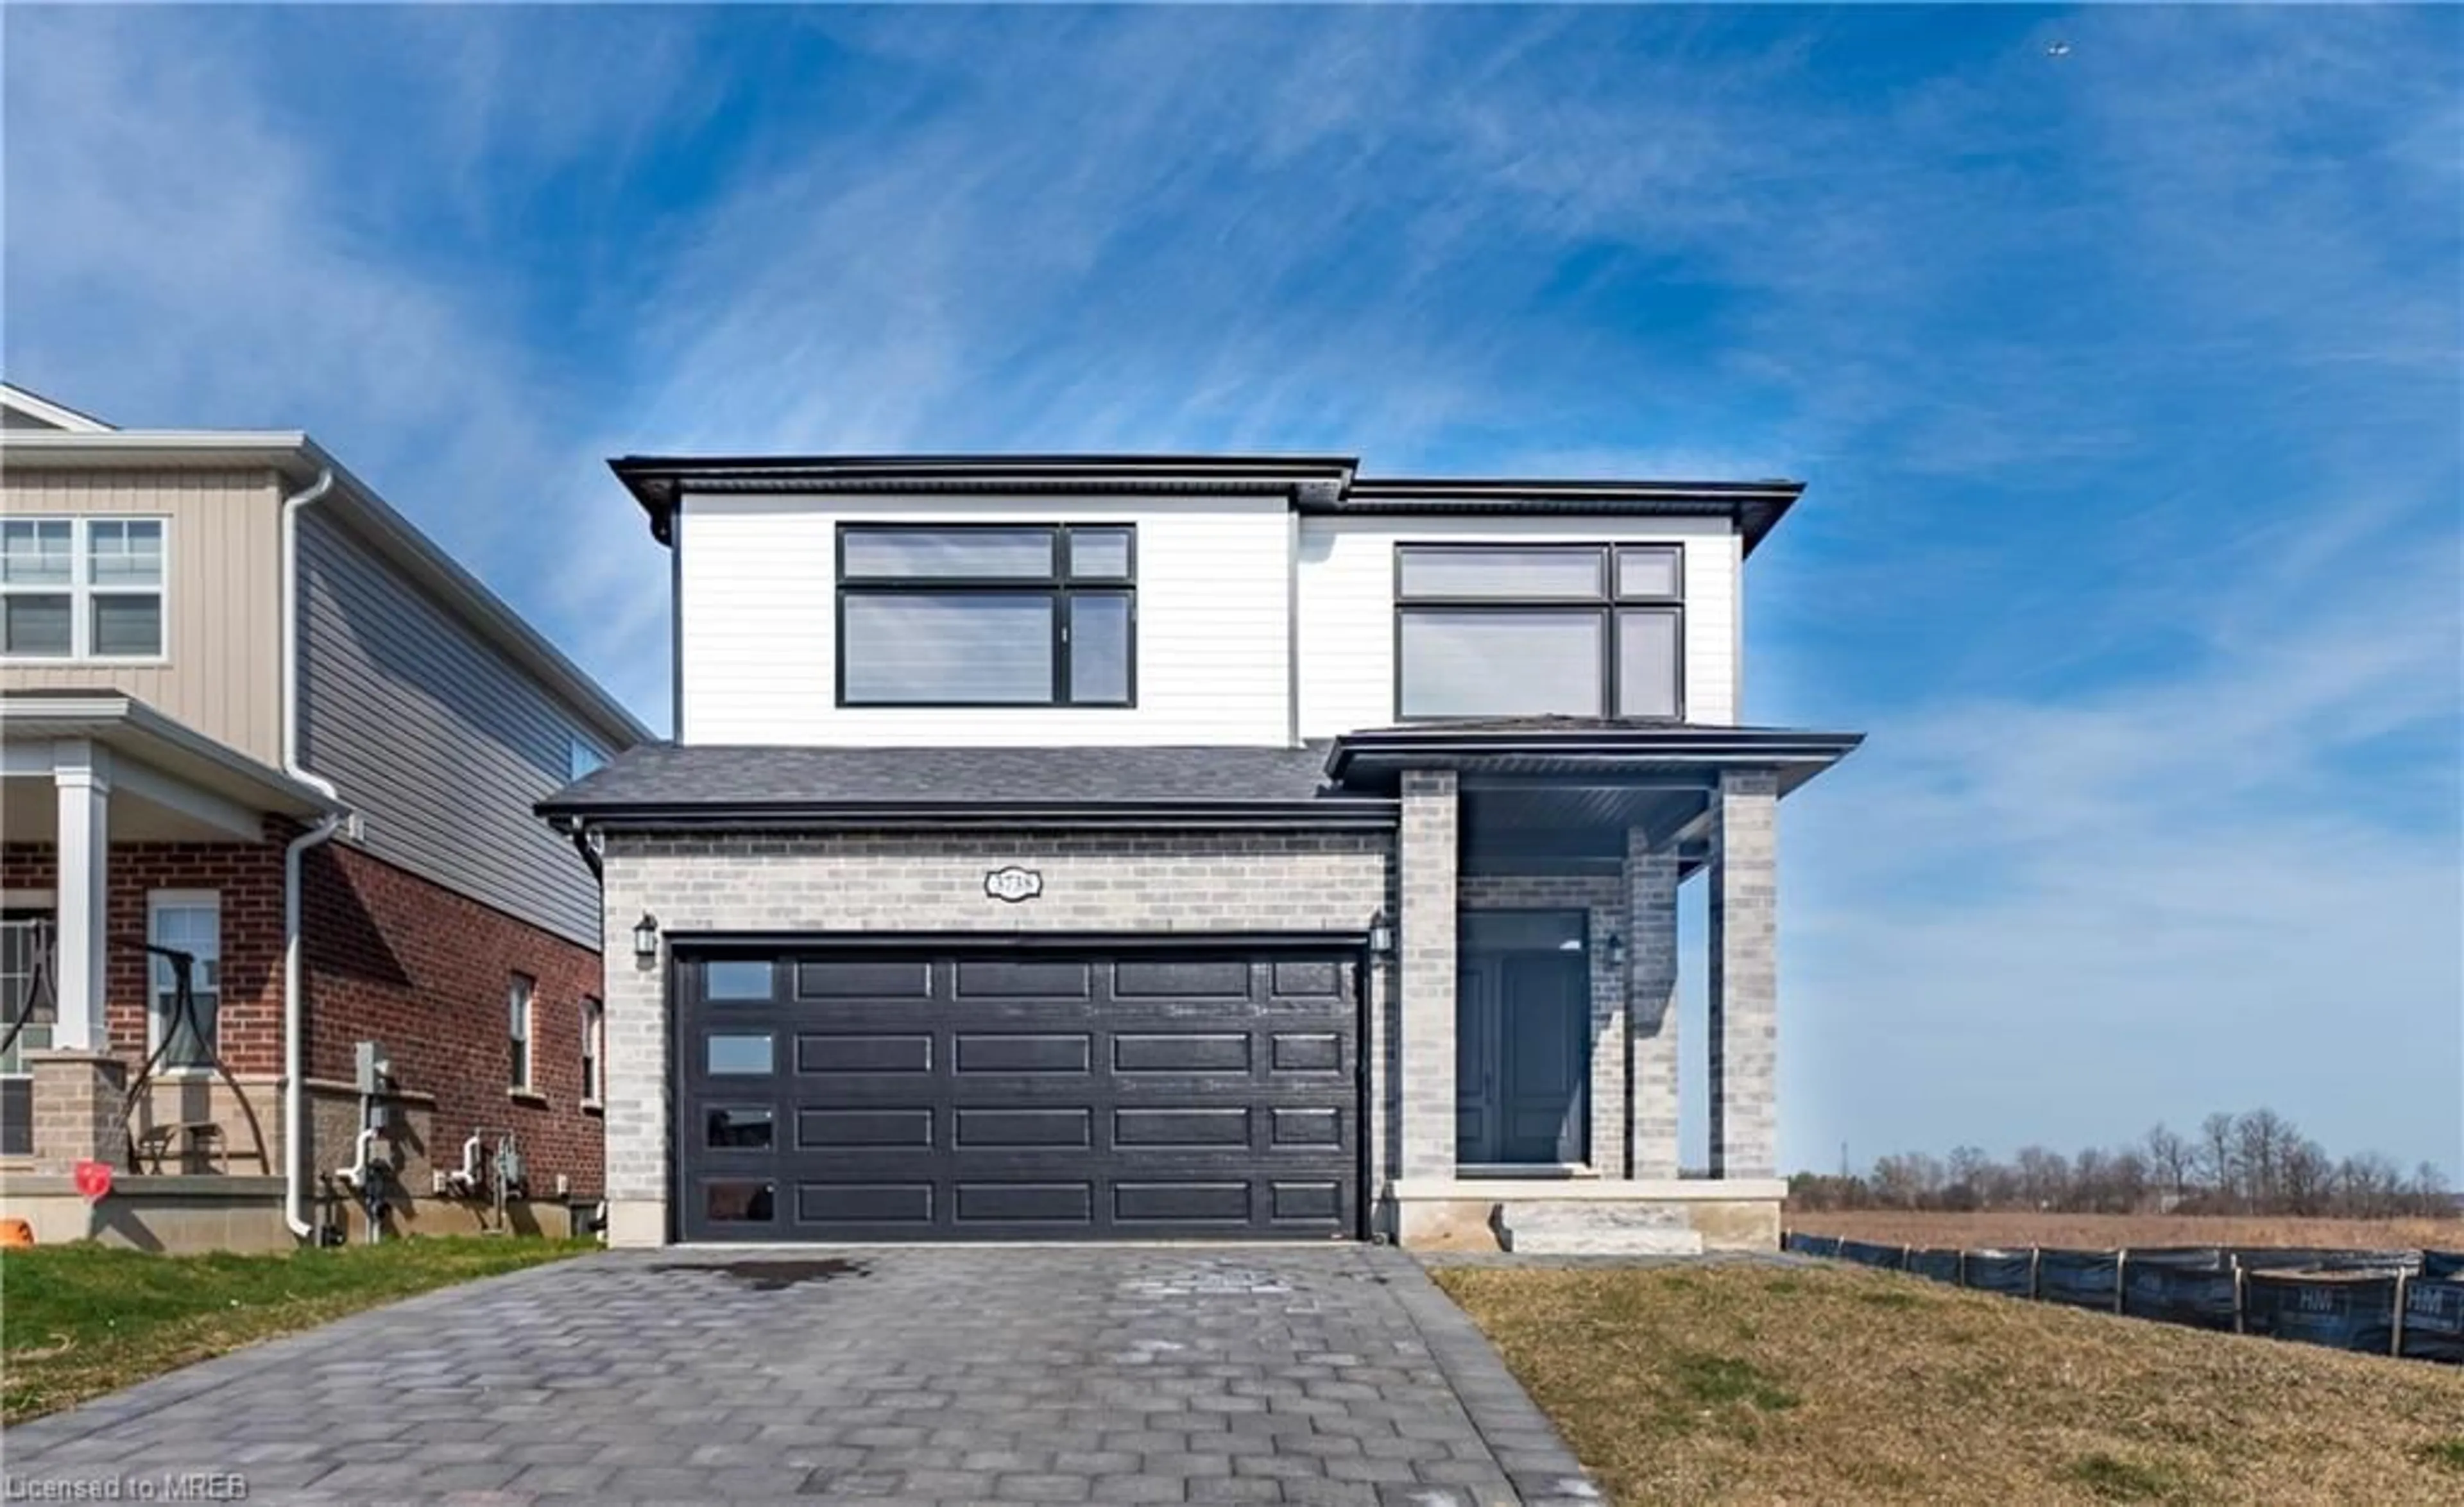 Home with brick exterior material for 3738 Stewart Avenue Ave, London Ontario N6L 0J1